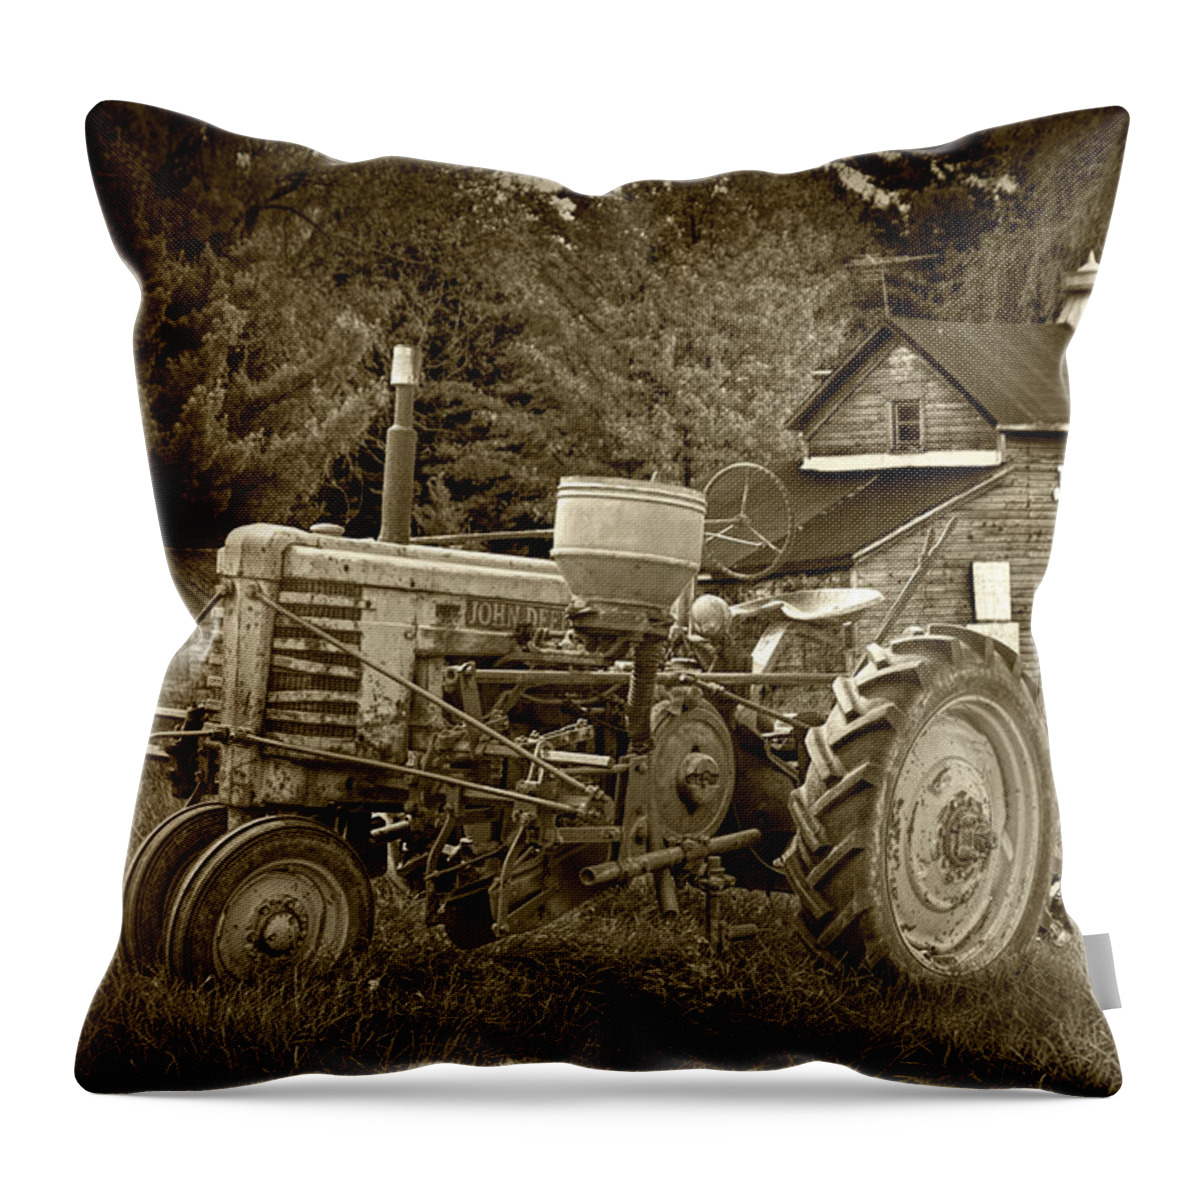 Farm Throw Pillow featuring the photograph Sepia Tone Old Vintage John Deere Tractor by Randall Nyhof